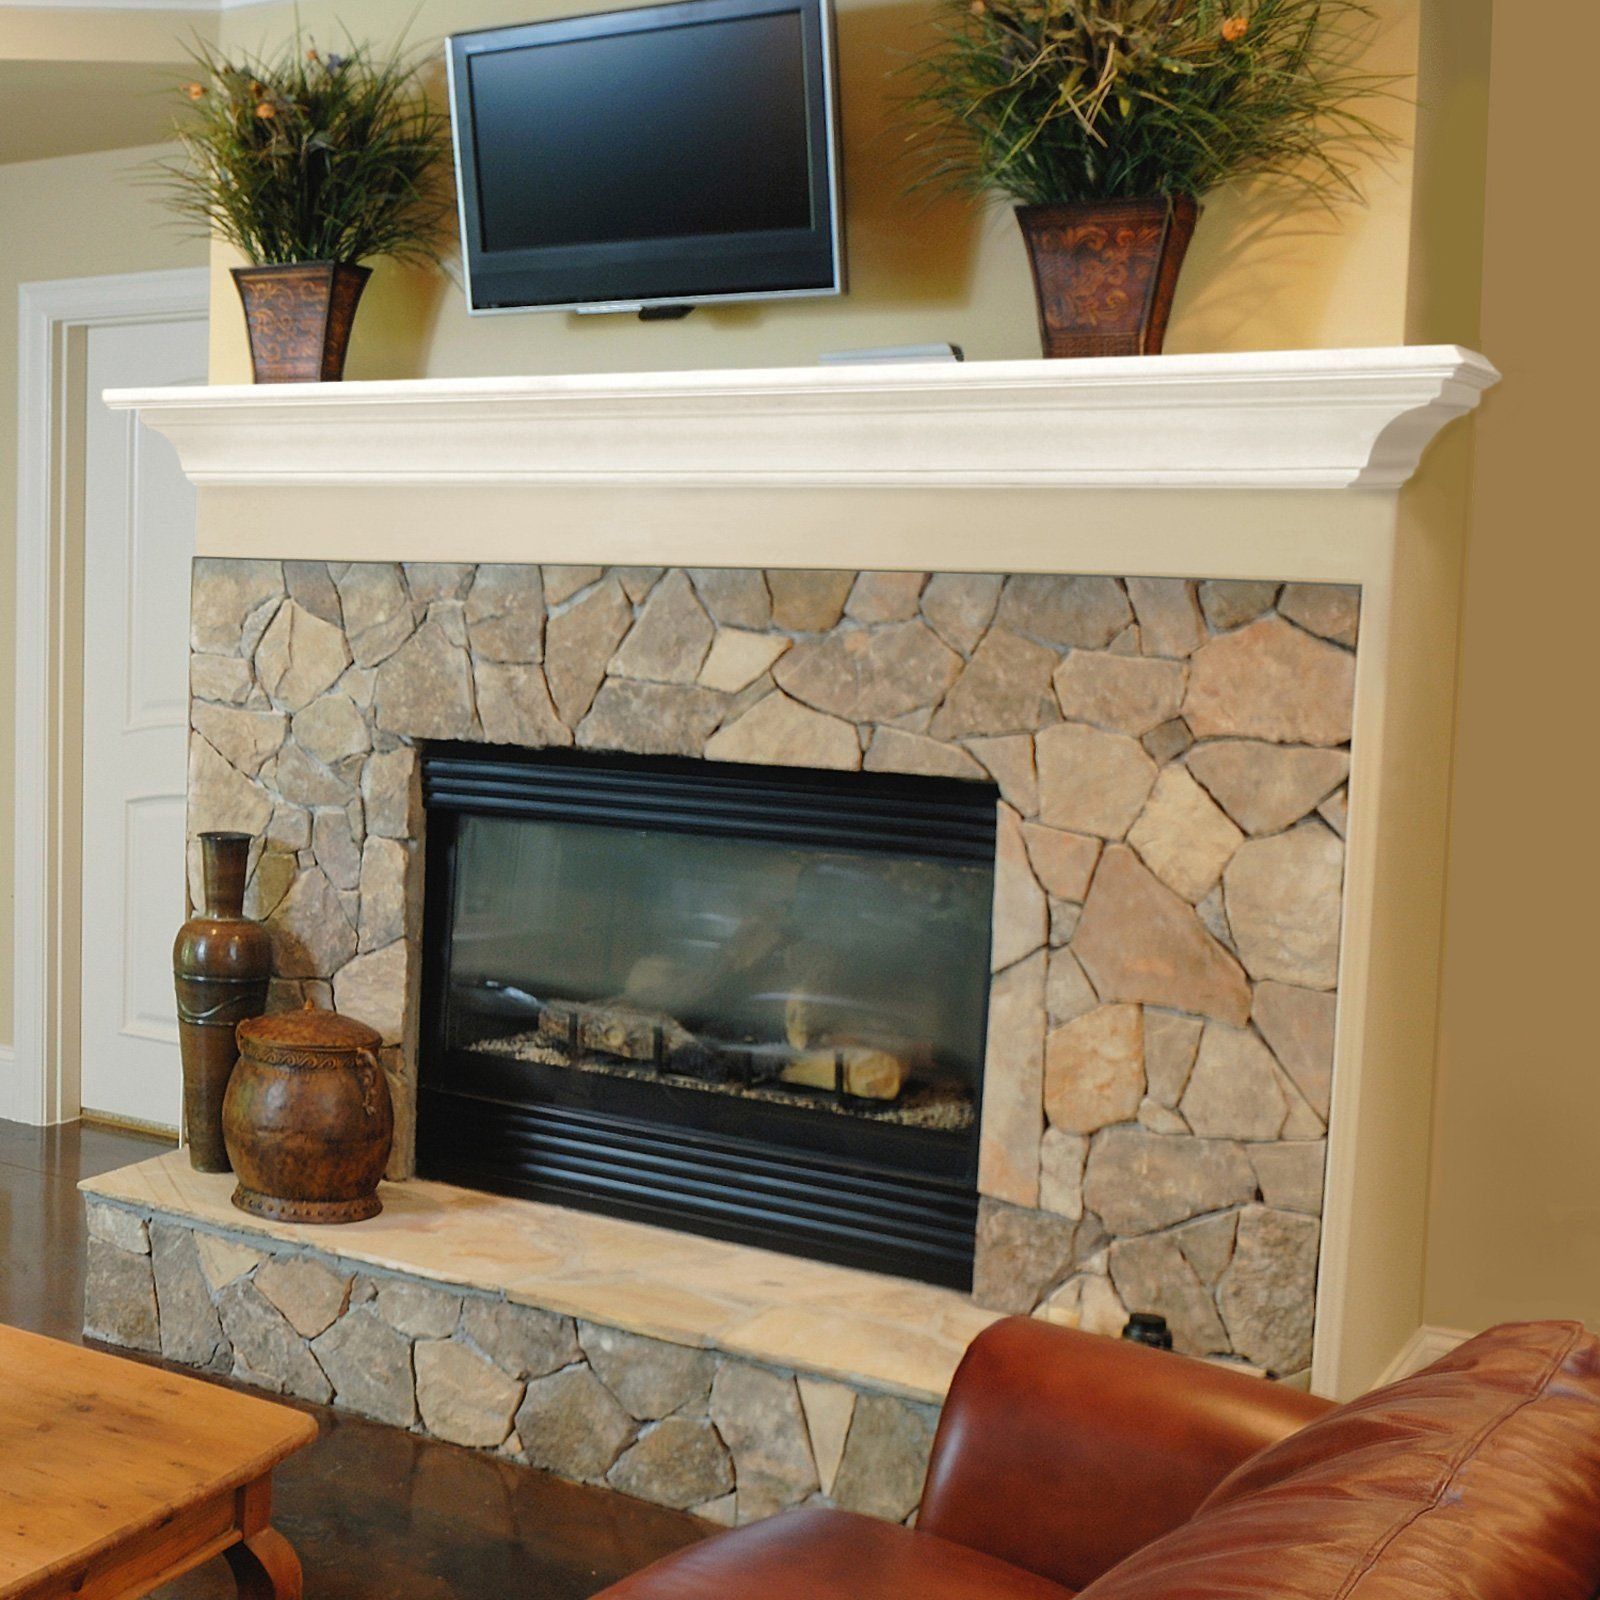 How to Build A Fireplace Mantel Shelf with Crown Molding New Painted Wooden White Fireplace Mantel Shelf In 2019